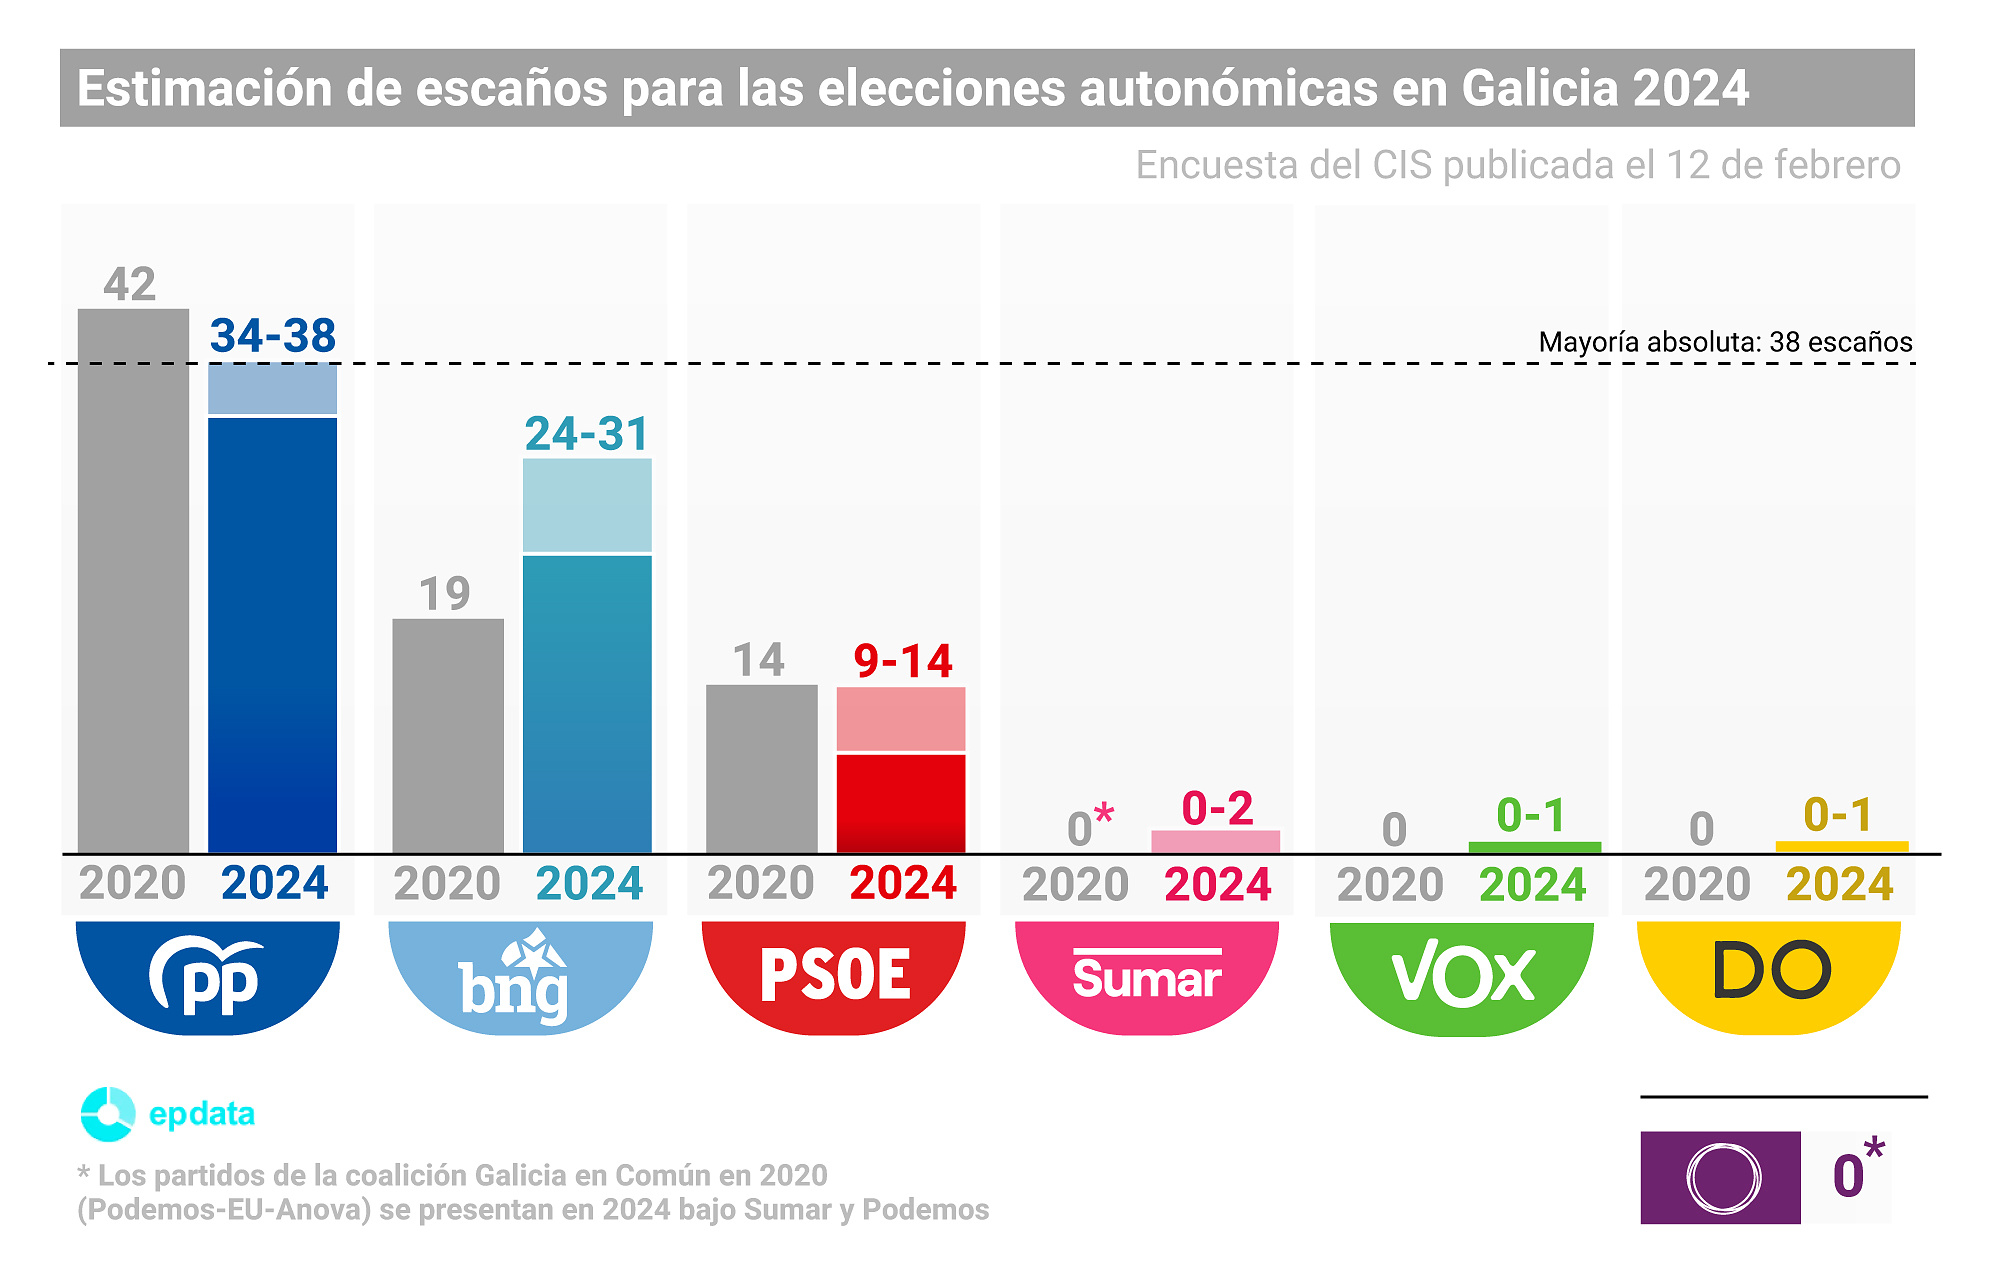 The CIS leaves the absolute power of the PP in Galicia in the air in the face of a triggered BNG, Sumar in recovery and a collapsed PSOE